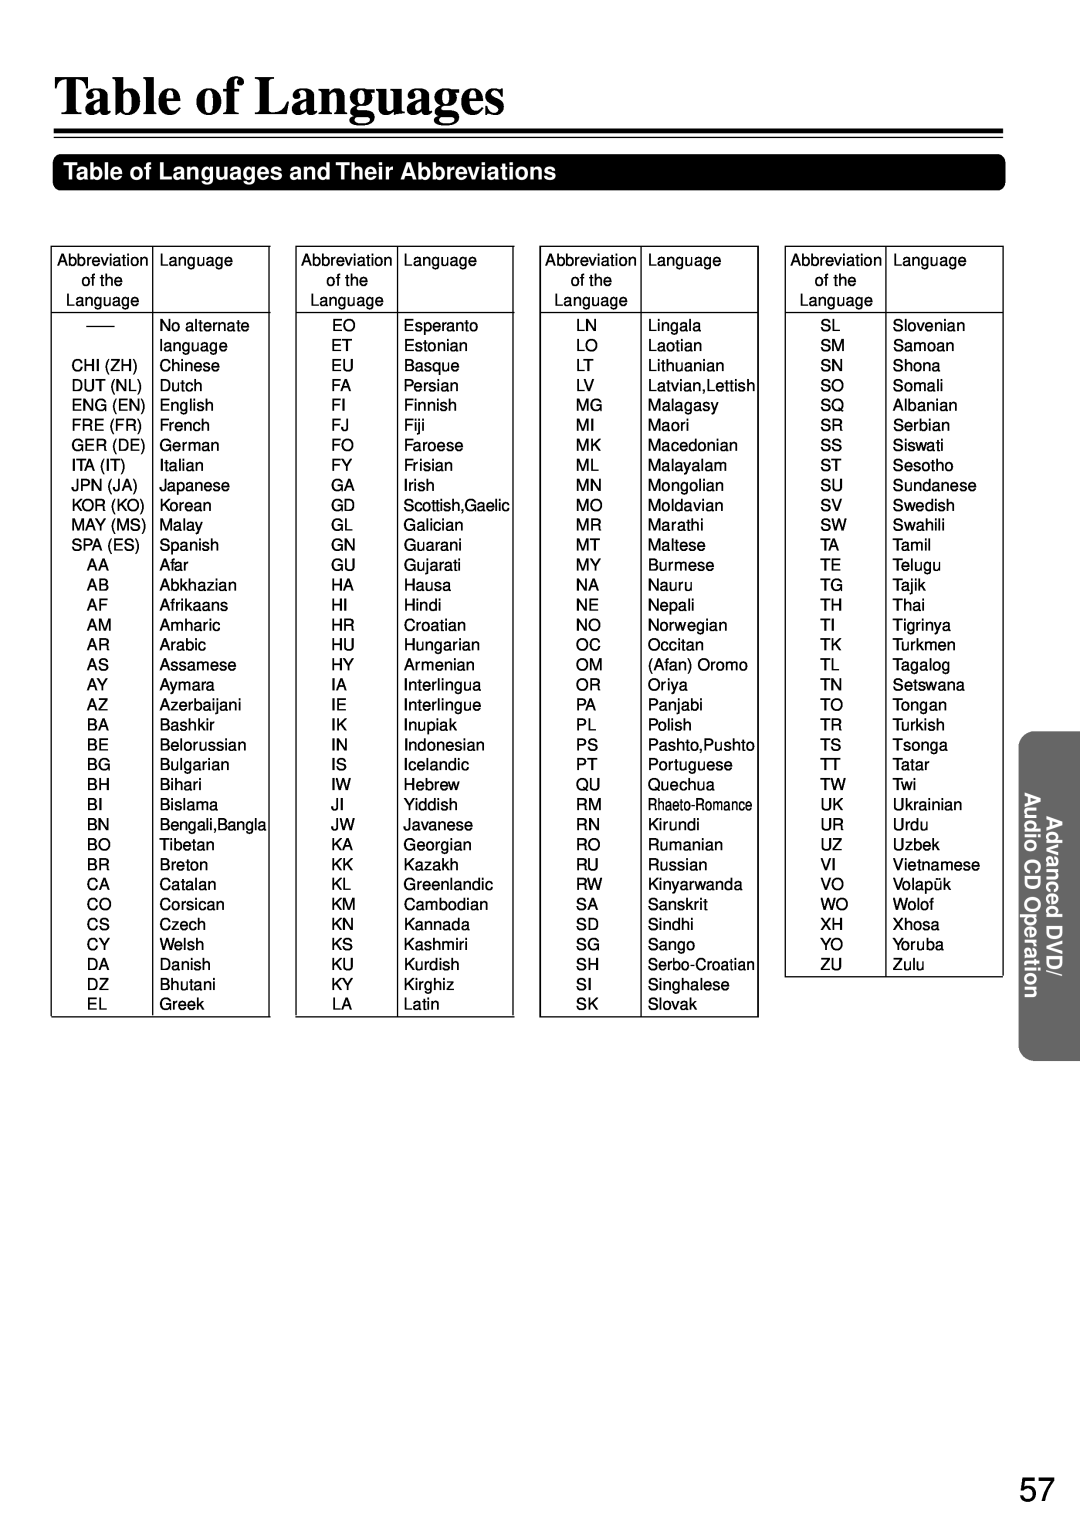 Onkyo DR-90 instruction manual Table of Languages and Their Abbreviations, Advanced DVD/ Audio CD Operation 